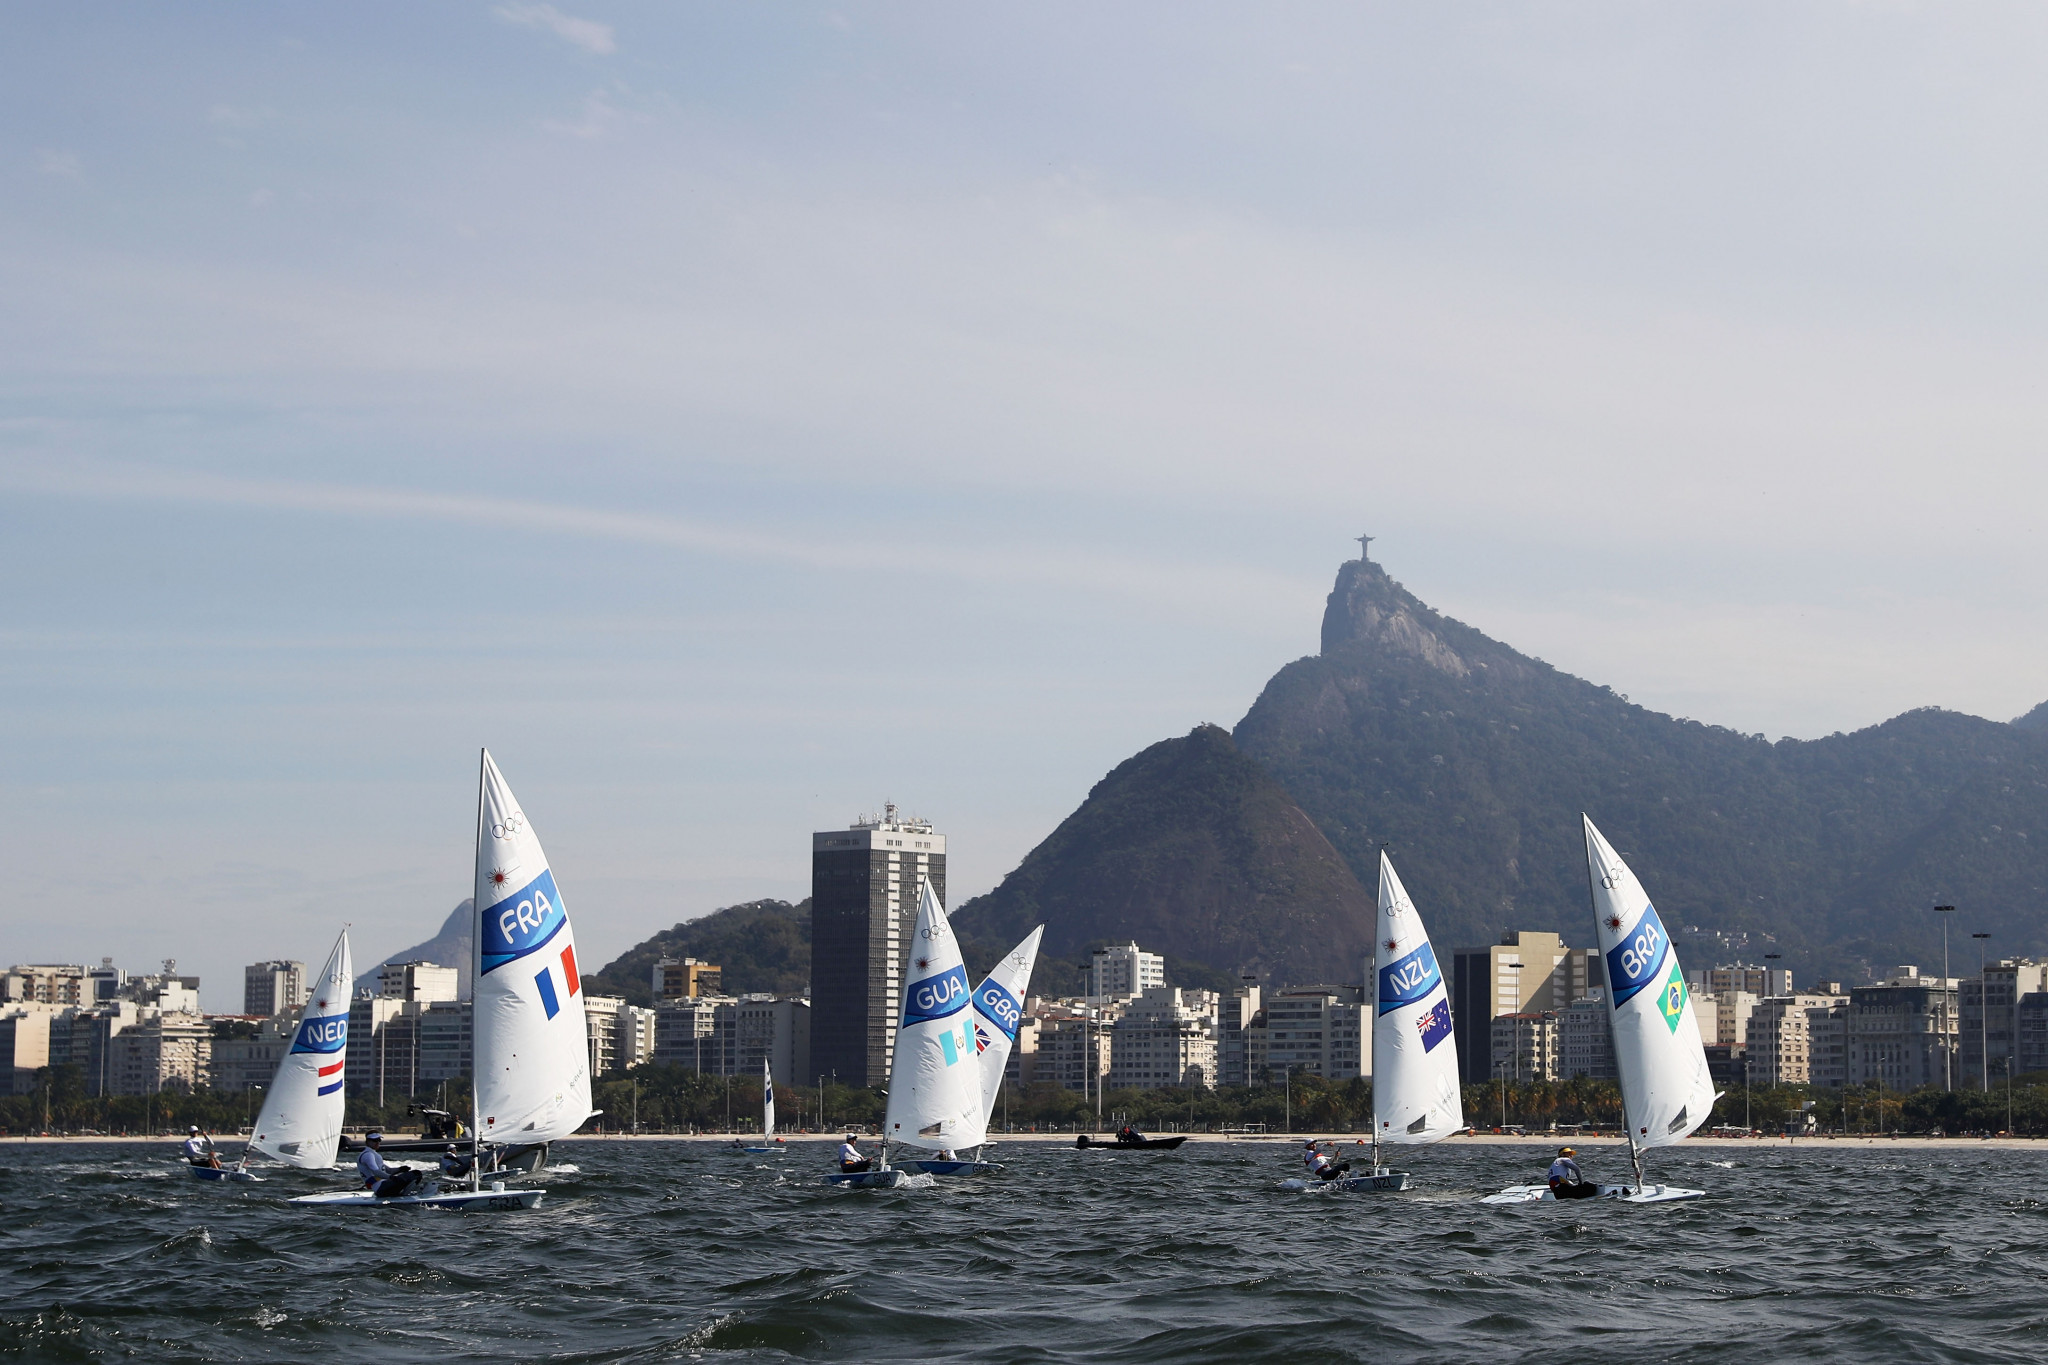 International Laser Class Association ends relationship with approved builder of Olympic boat